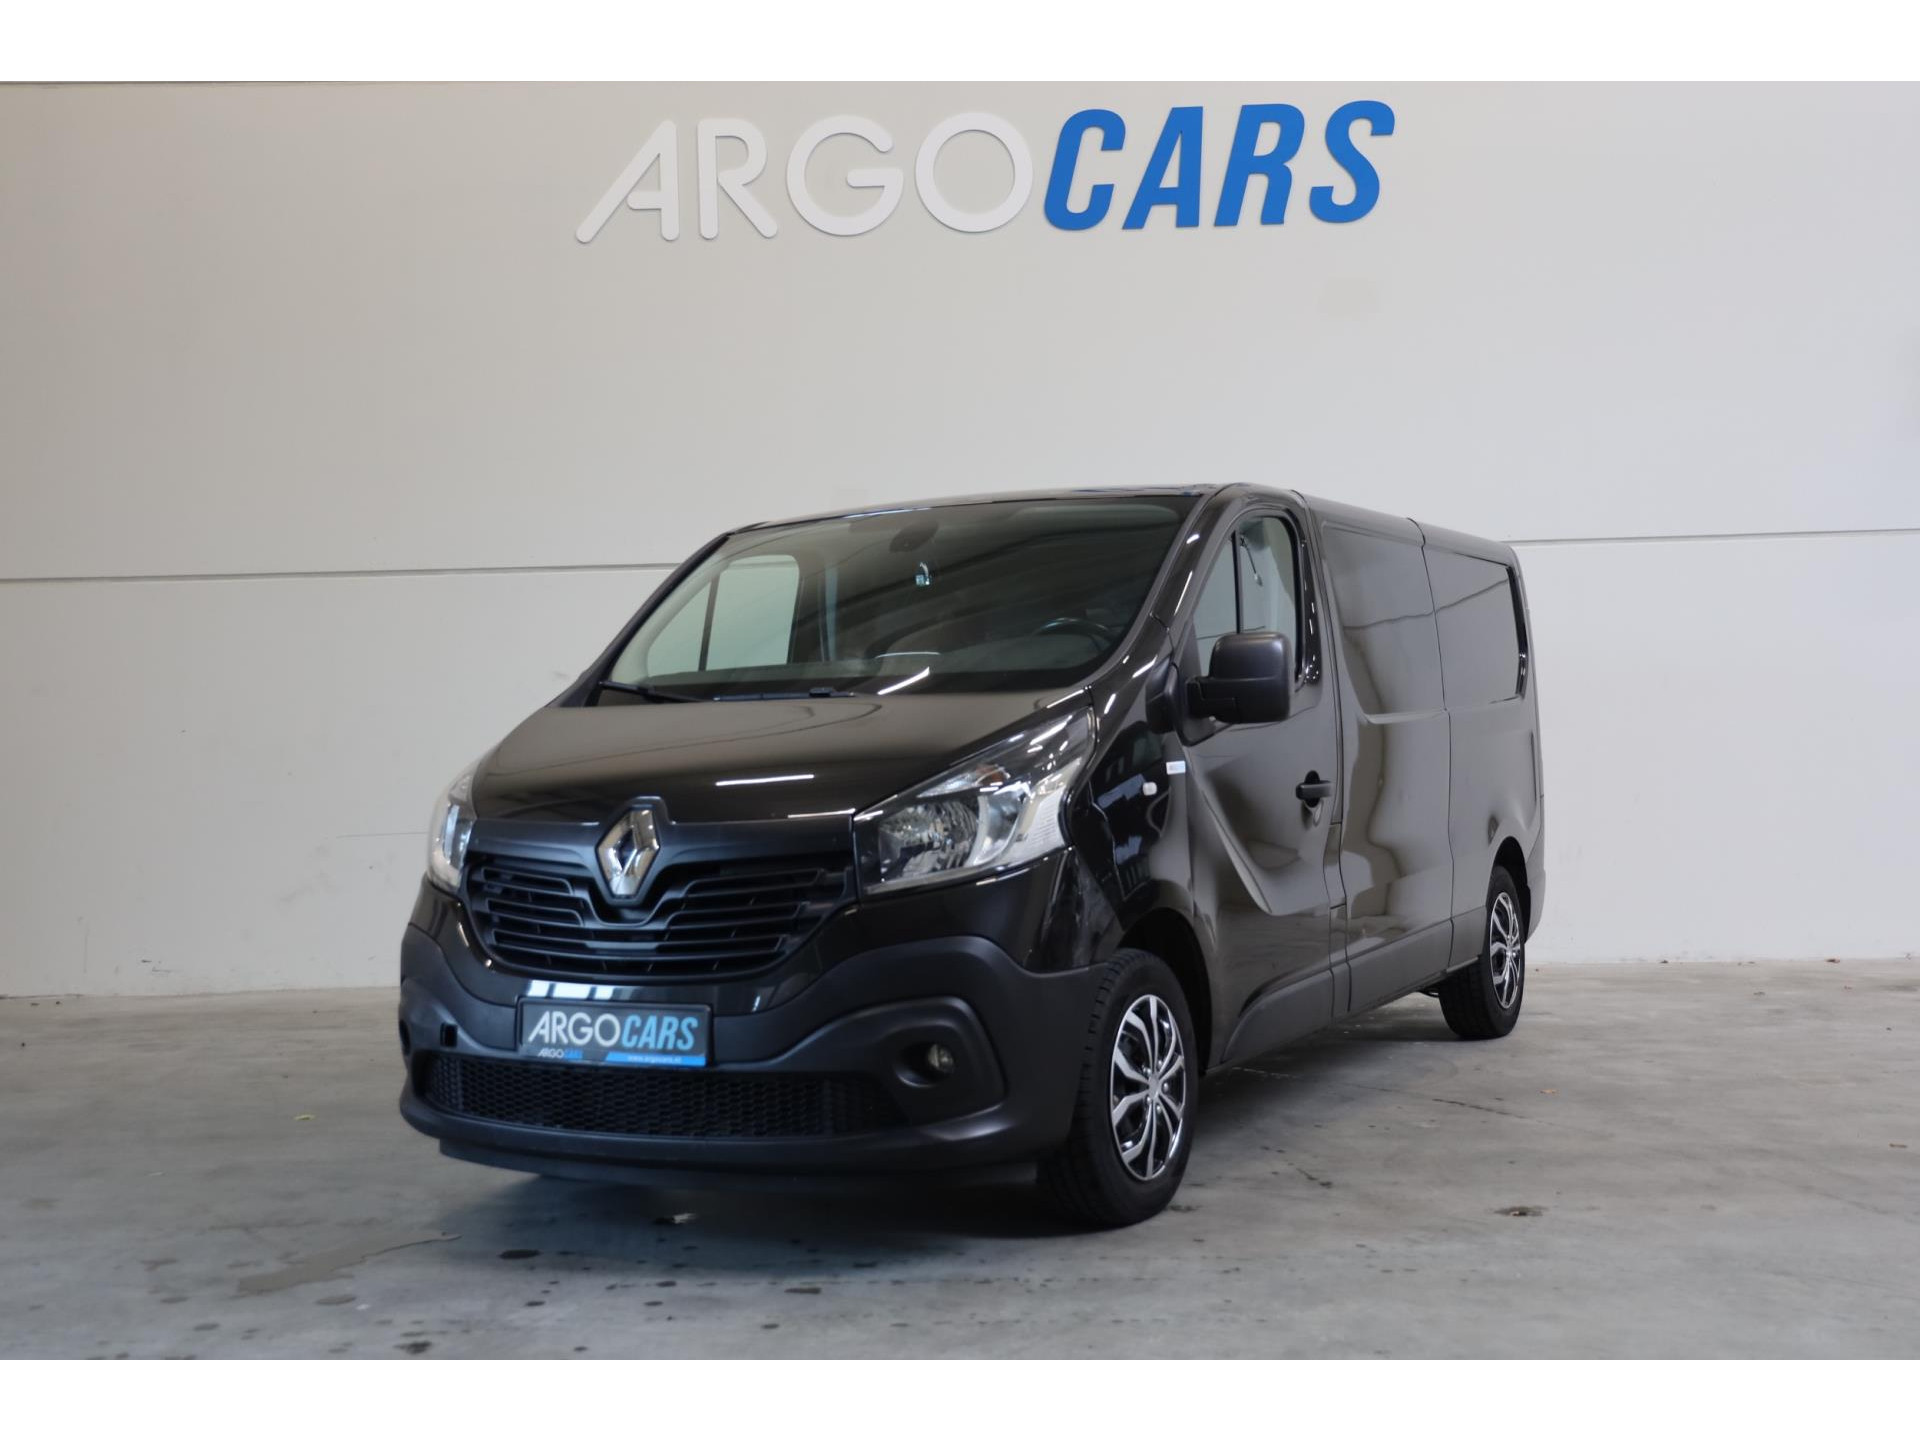 Renault Trafic 1.6 dCi T29 L2/H1 LUXE ENERGY CAMERA NAVI ZWART PDC CRUISE TOP BUS LEASE v/a € 99,-p.m.INRUIL MOGELIJK  Bestelauto